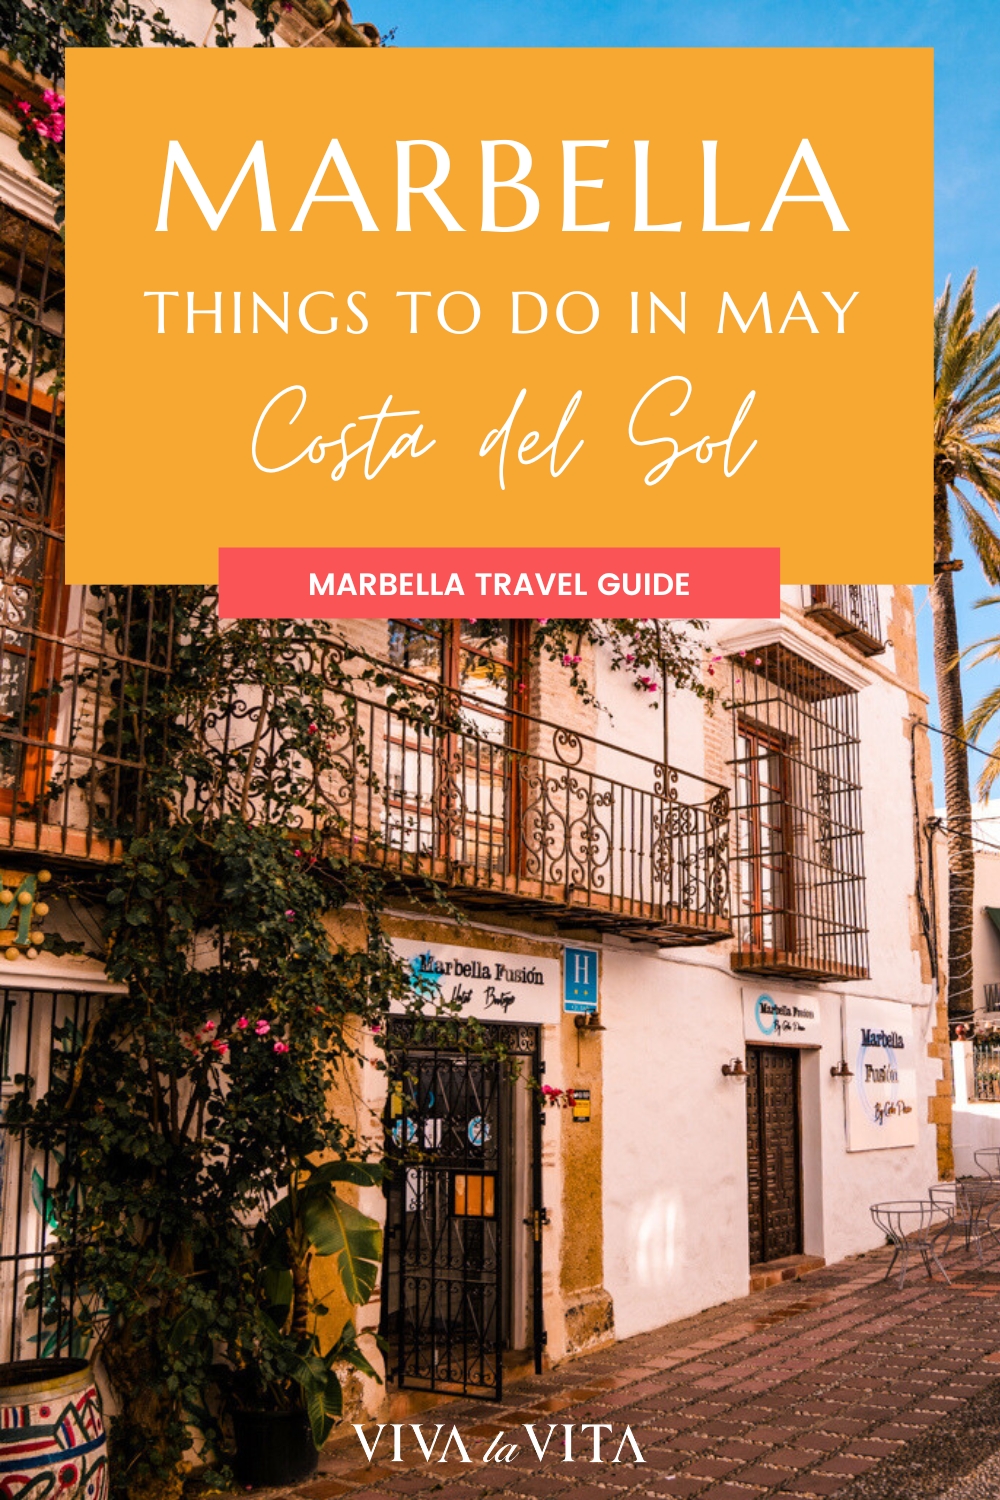 Pinterest image showing the streets of Marbella old town, with a headline that reads: Marbella things to do in May, Costa del Sol, Marbella Travel Guide